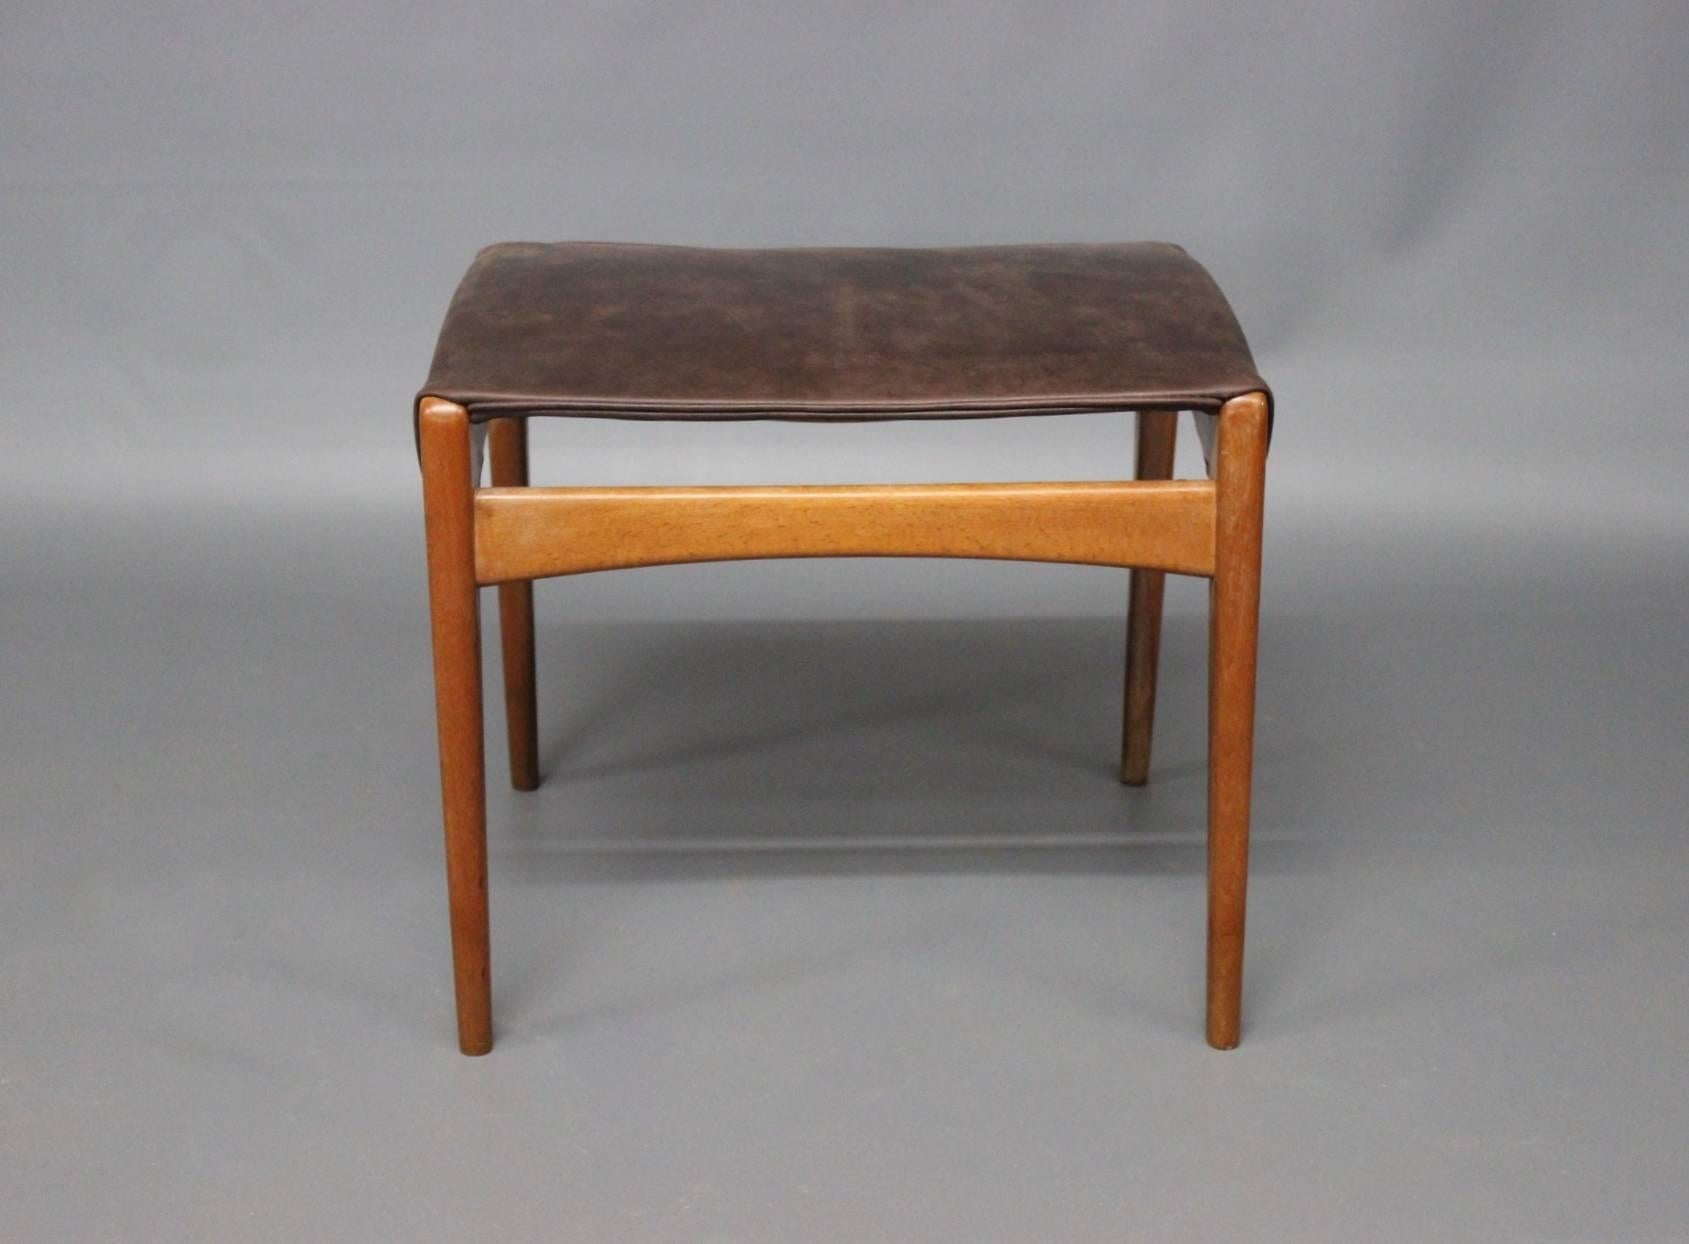 Stool in polished wood and dark brown patinated leather of Danish design from the 1960s. The stool is stamped 